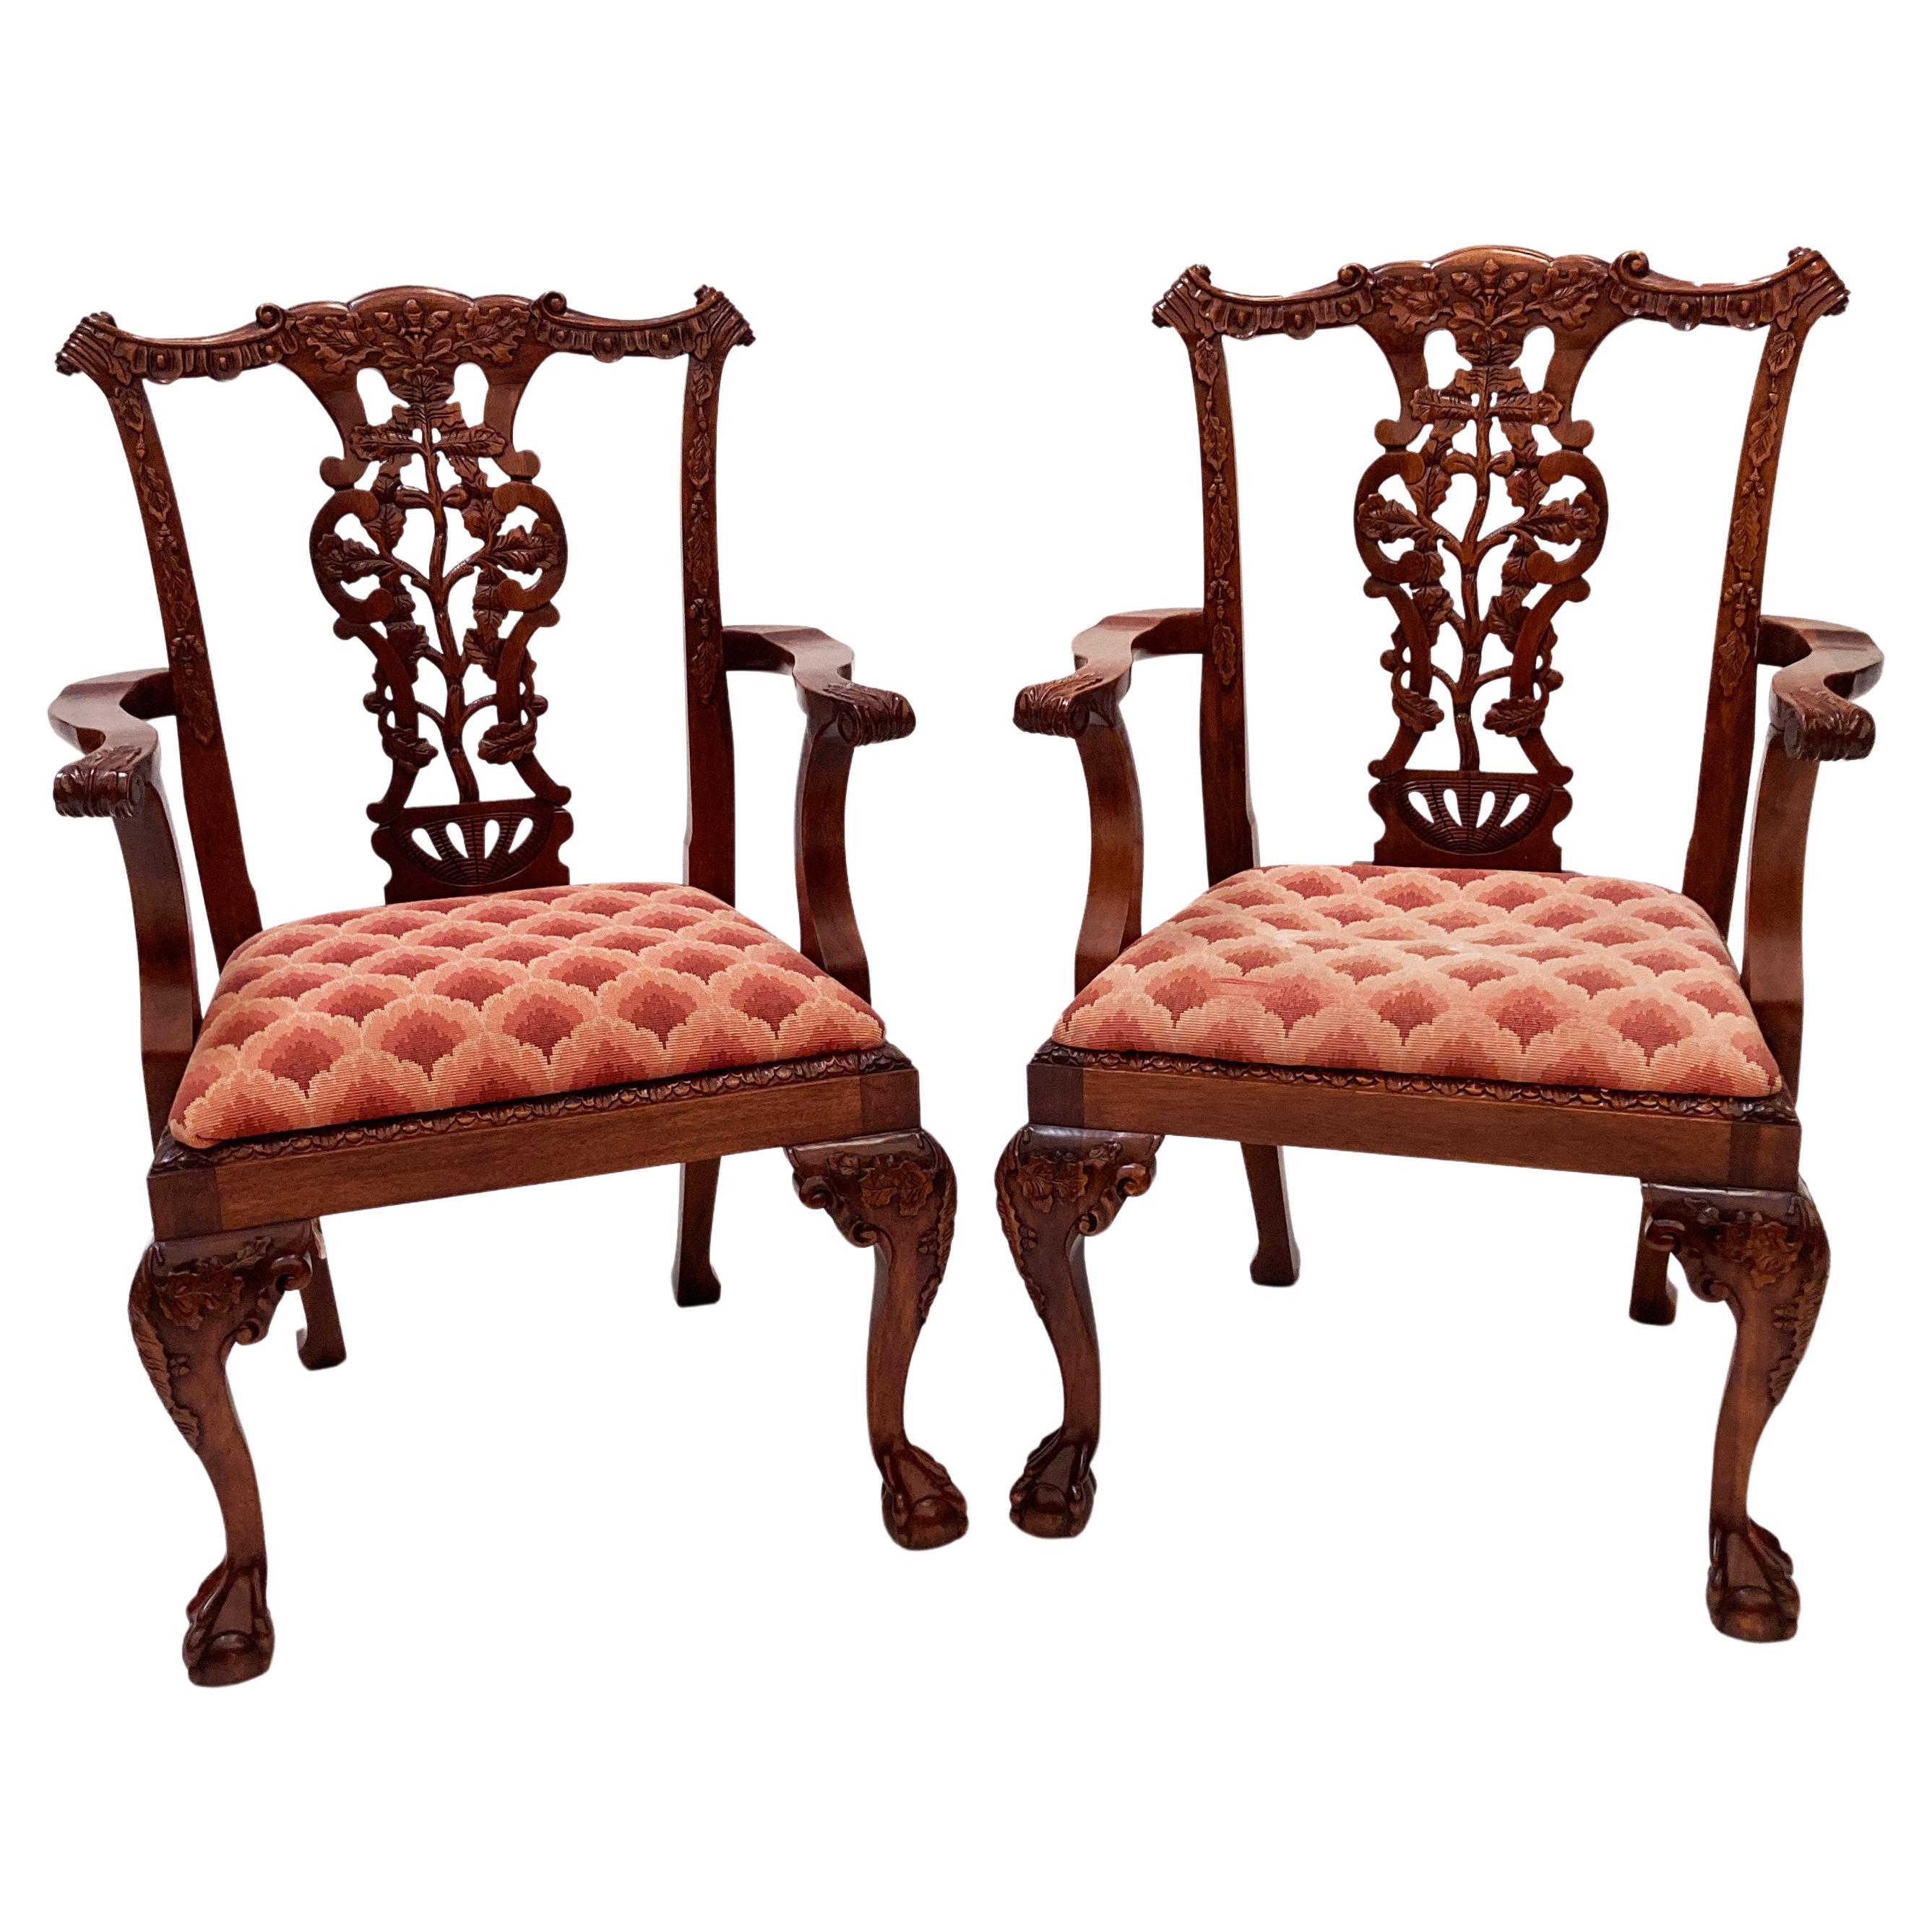 Mid 19th Century Pair of Early English Mahogany Chippendale Open Arm Chairs